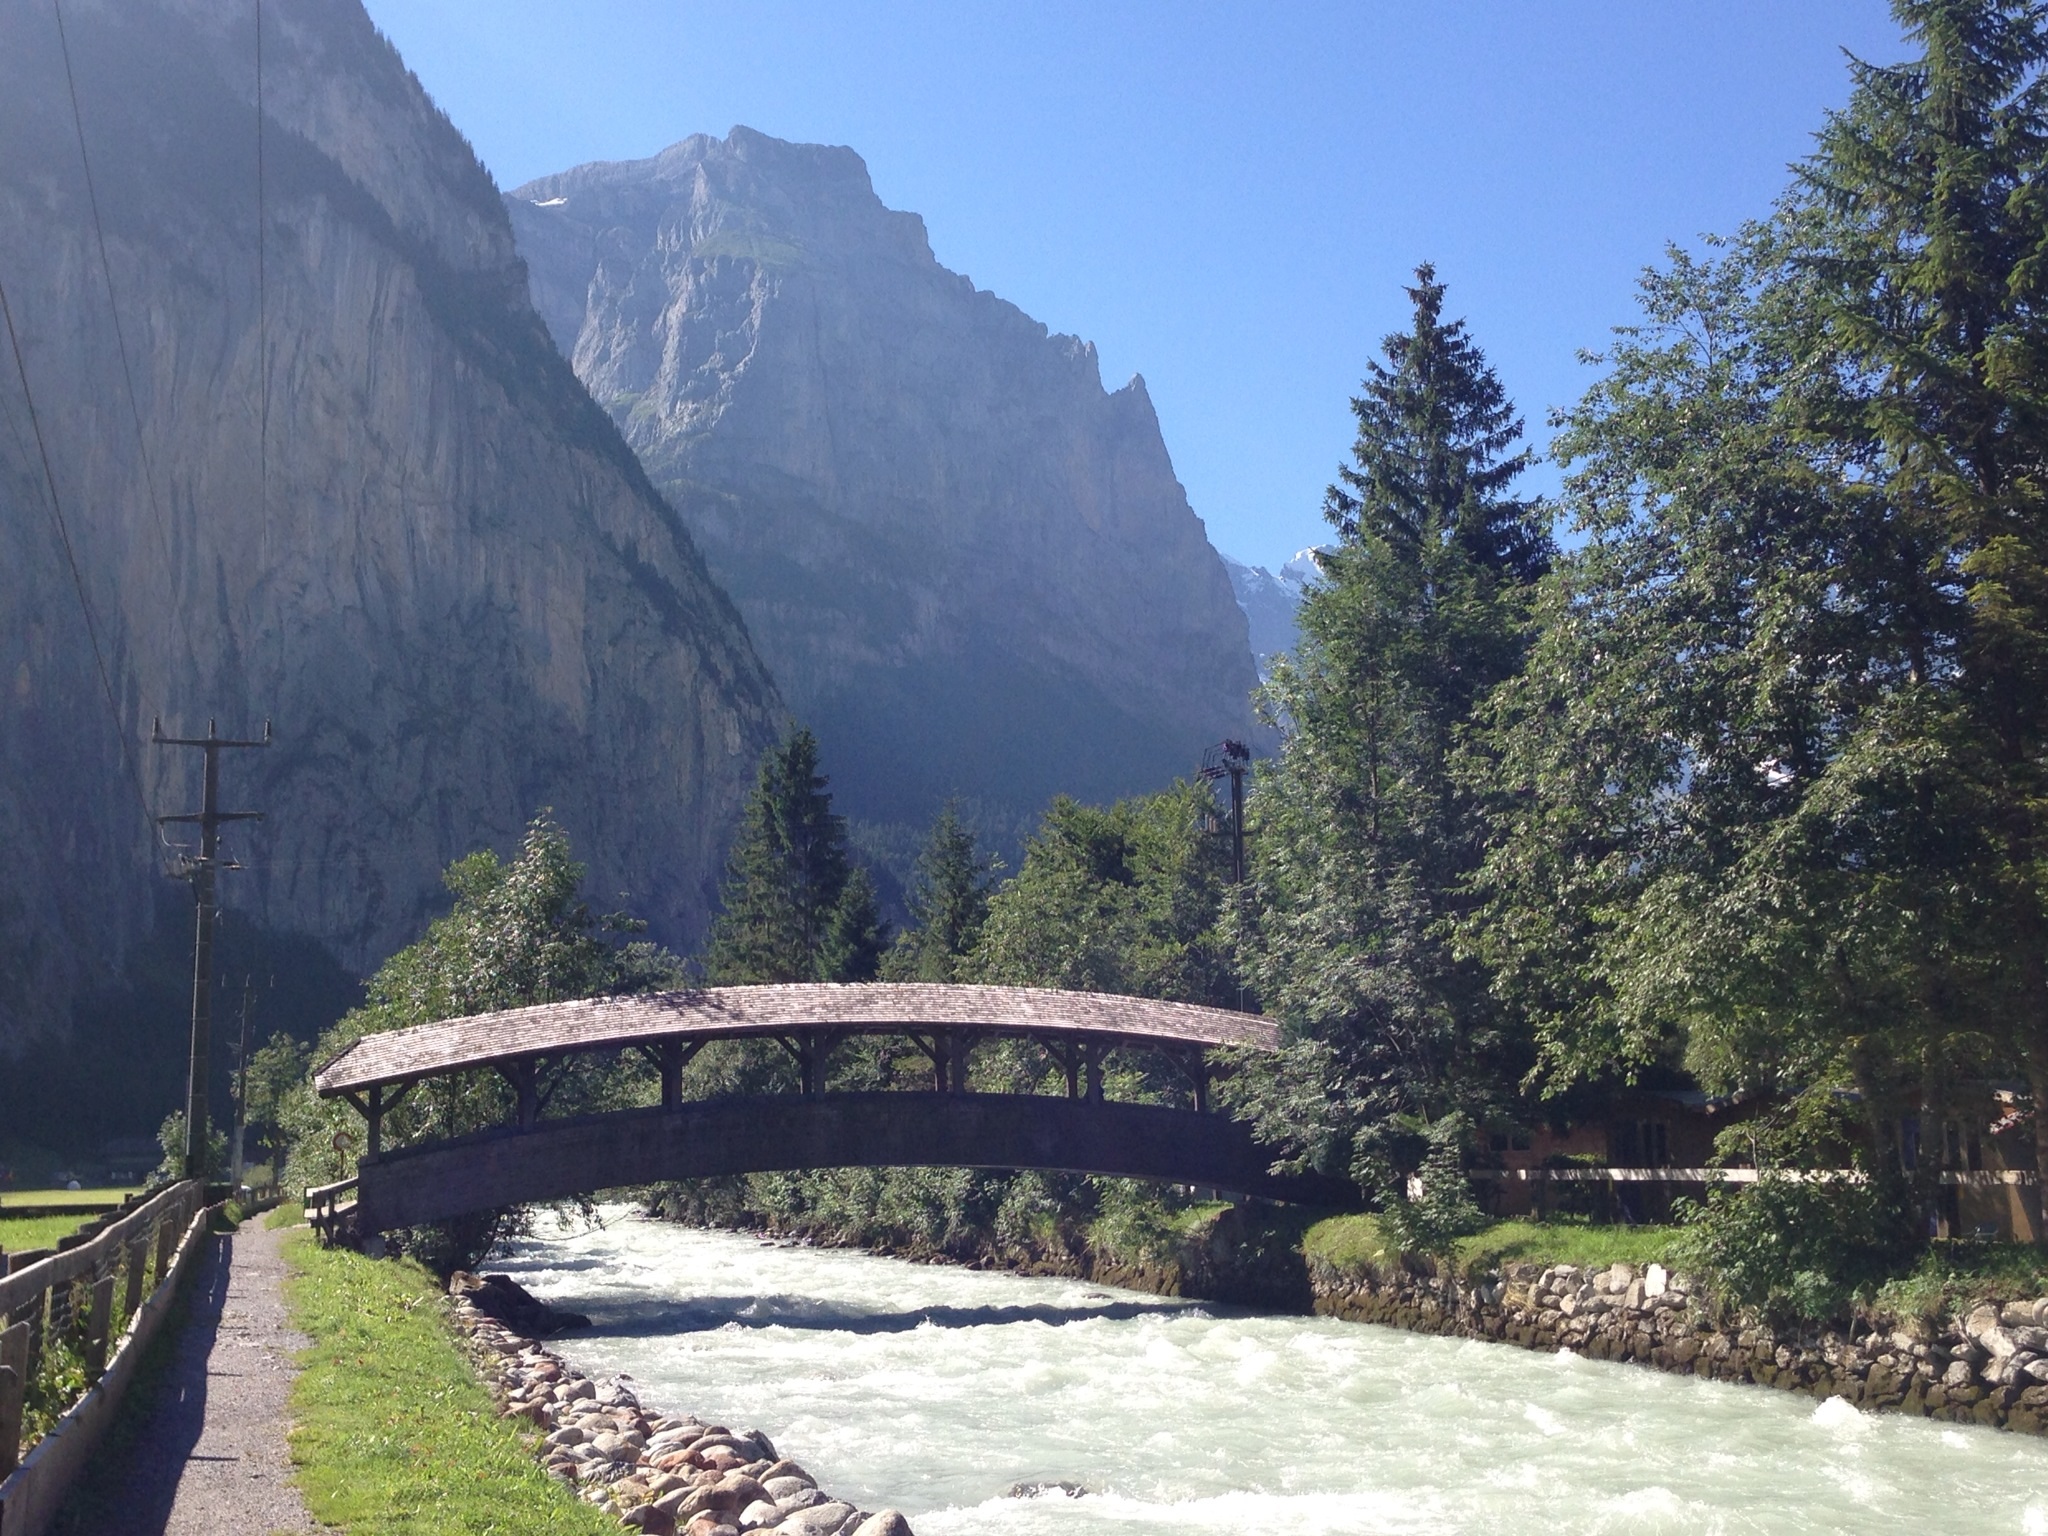 Walking along the river just out of Lauterbrunnen